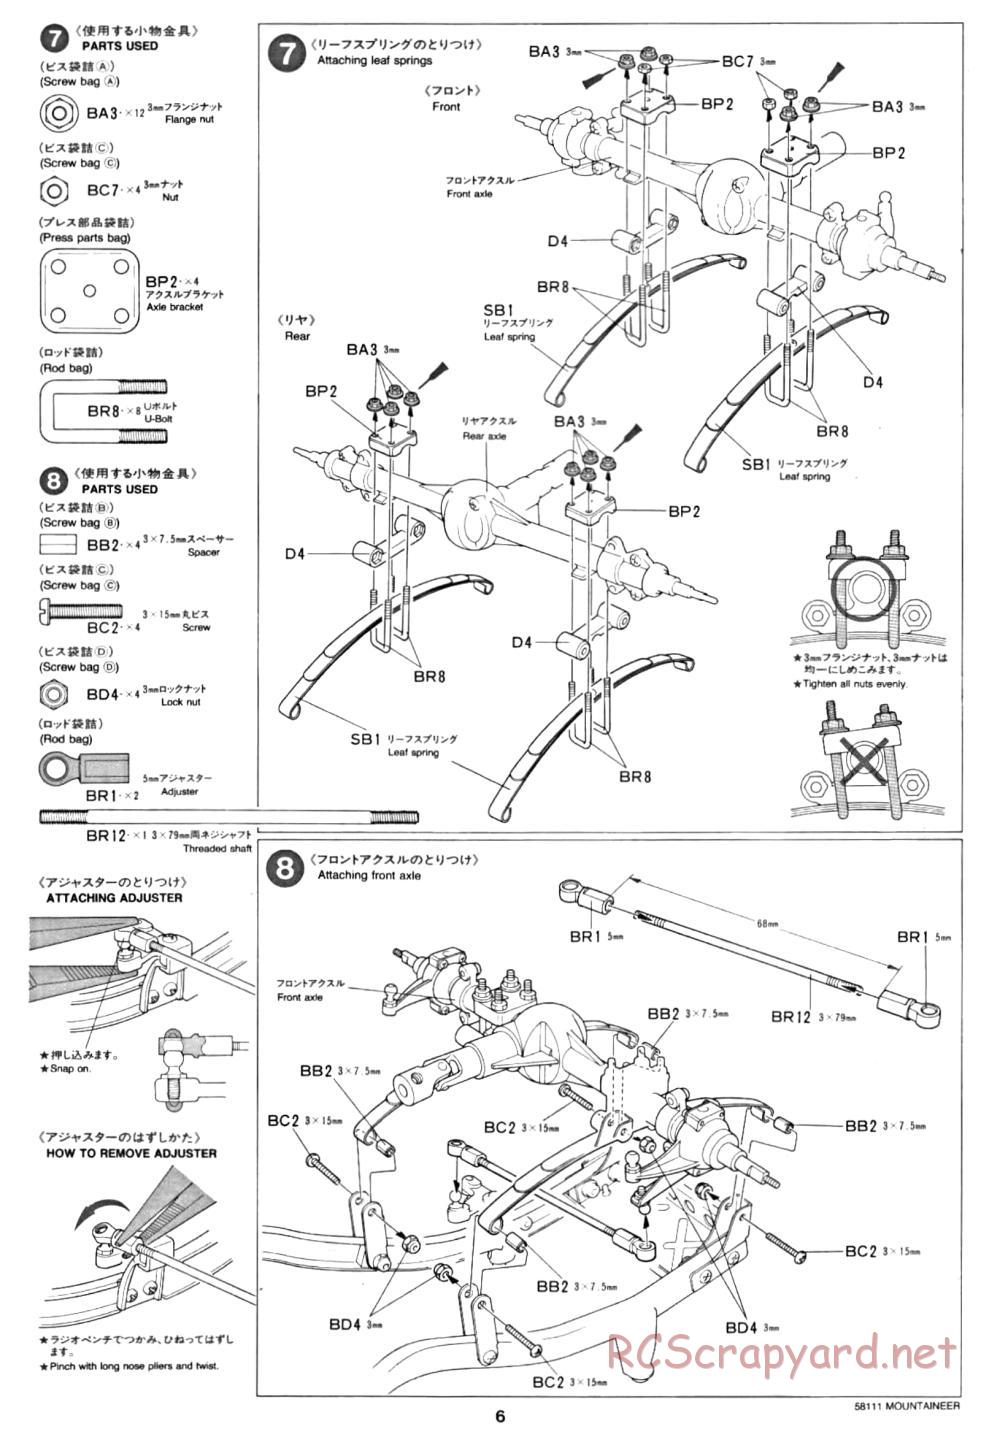 Tamiya - Toyota 4x4 Pick Up Mountaineer Chassis - Manual - Page 6